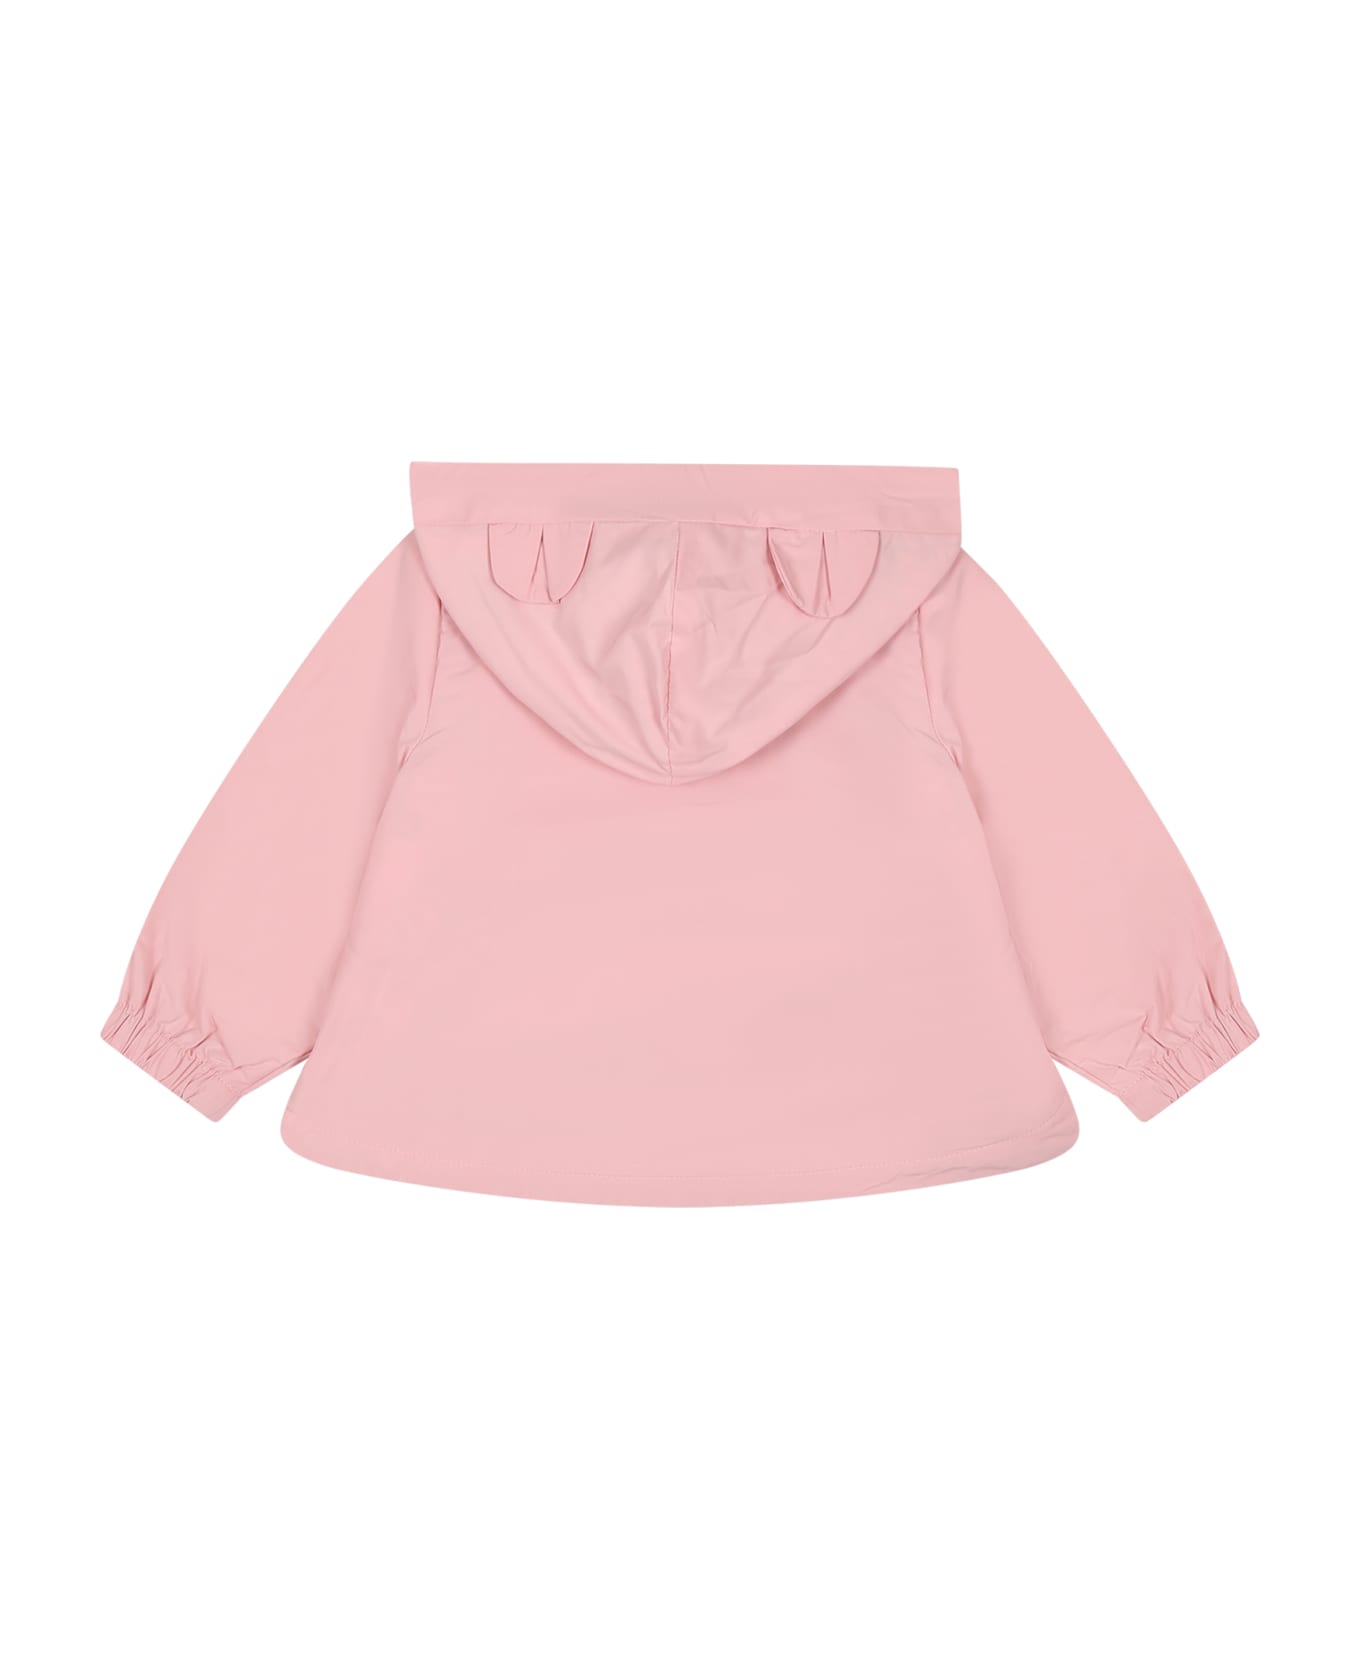 Moschino Pink Raincoat For Baby Girl With Teddy Bear And Logo - Pink コート＆ジャケット